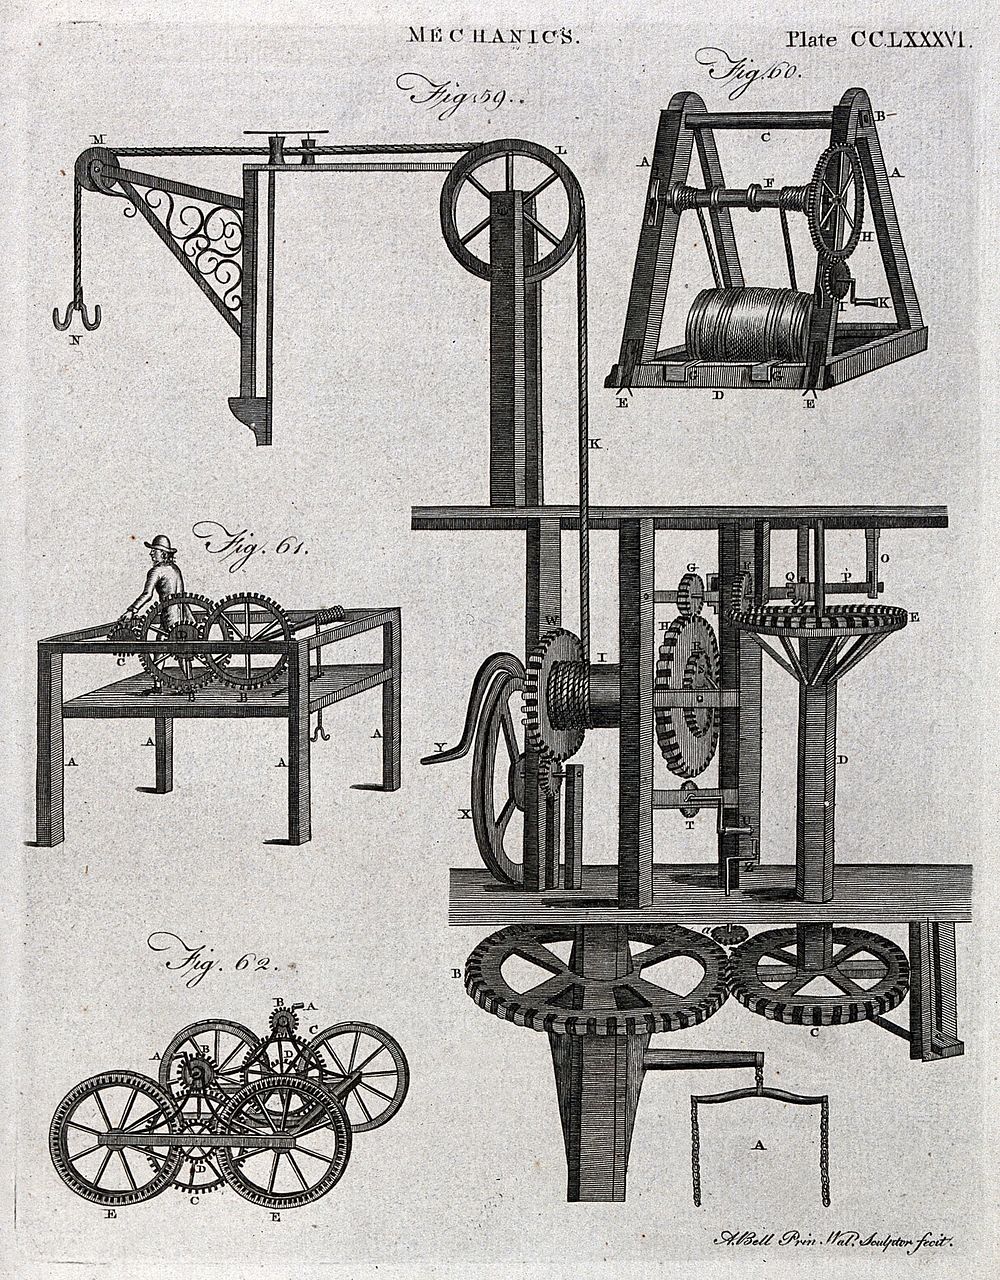 Mechanics: forces and dynamics, pulleys. Engraving by A. Bell.